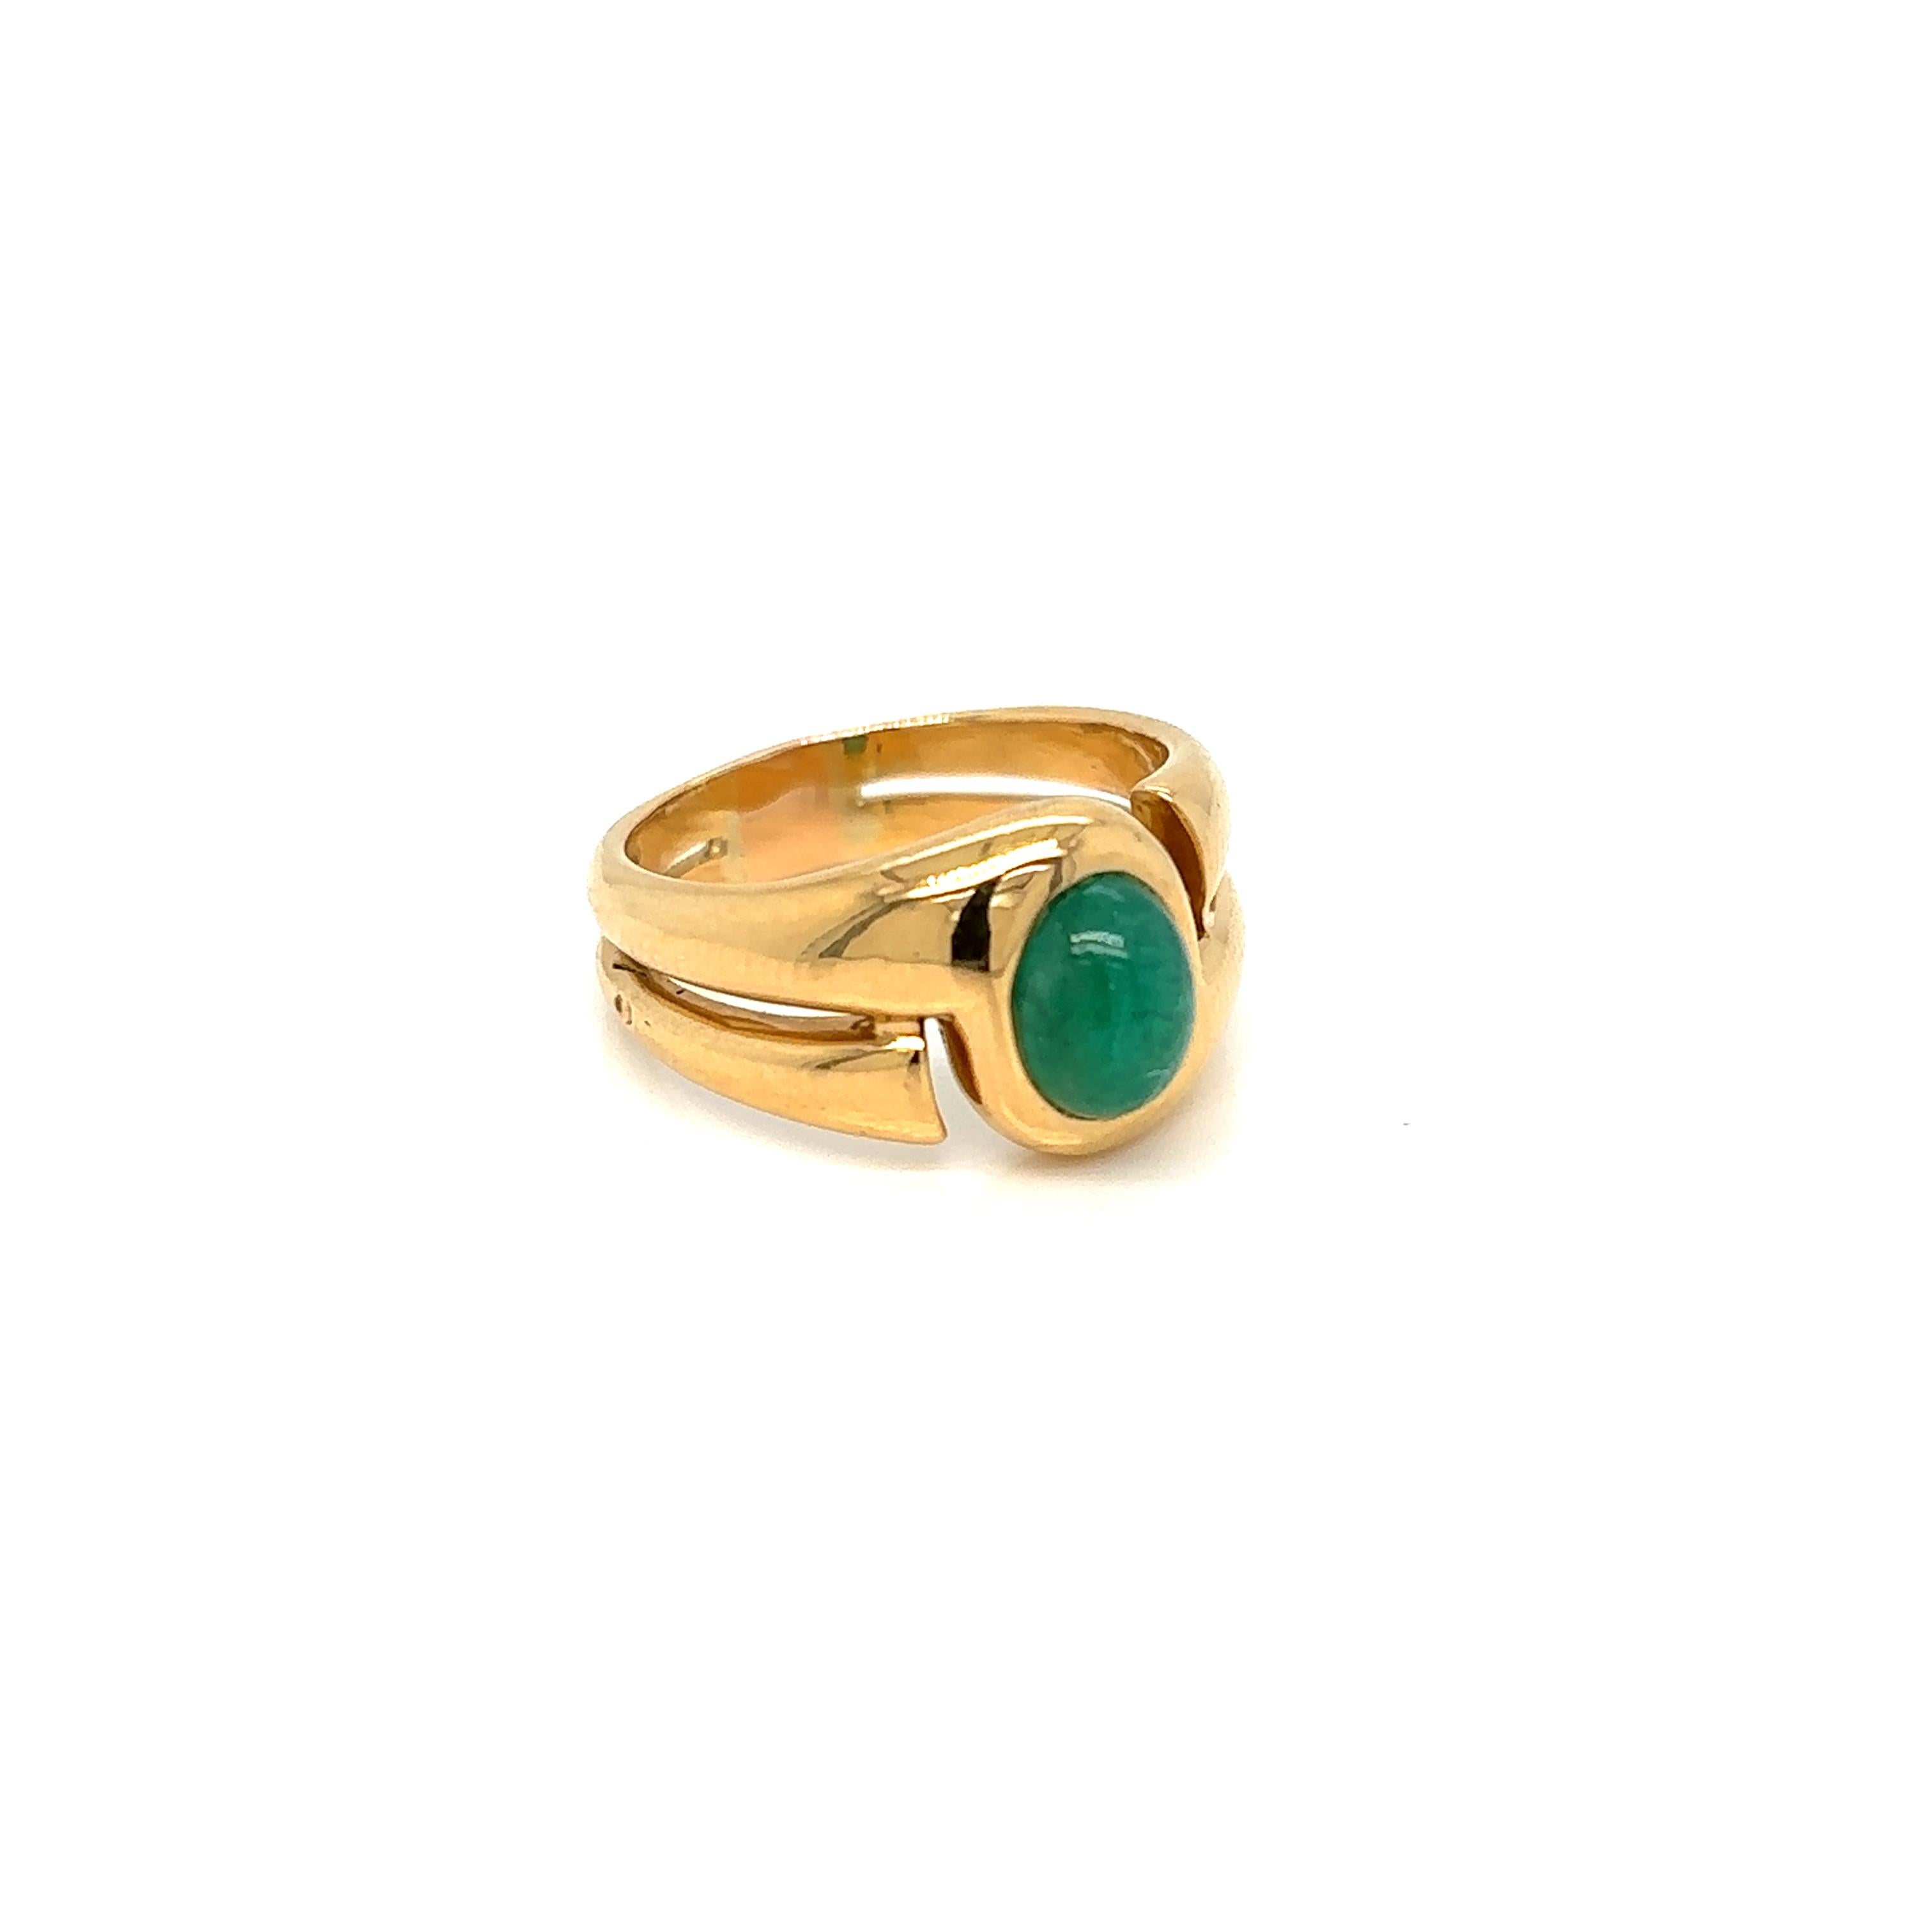 Classic vintage ring designed by Bvlgari, it features a Cabochon Natural Emerald of 1.37 carats mounted on 18k Yellow Gold. Made in Italy, circa 1980
Has a total weight of 8,8 grams. The actual size is 6, resizable.
Stamped, with the maker's mark,